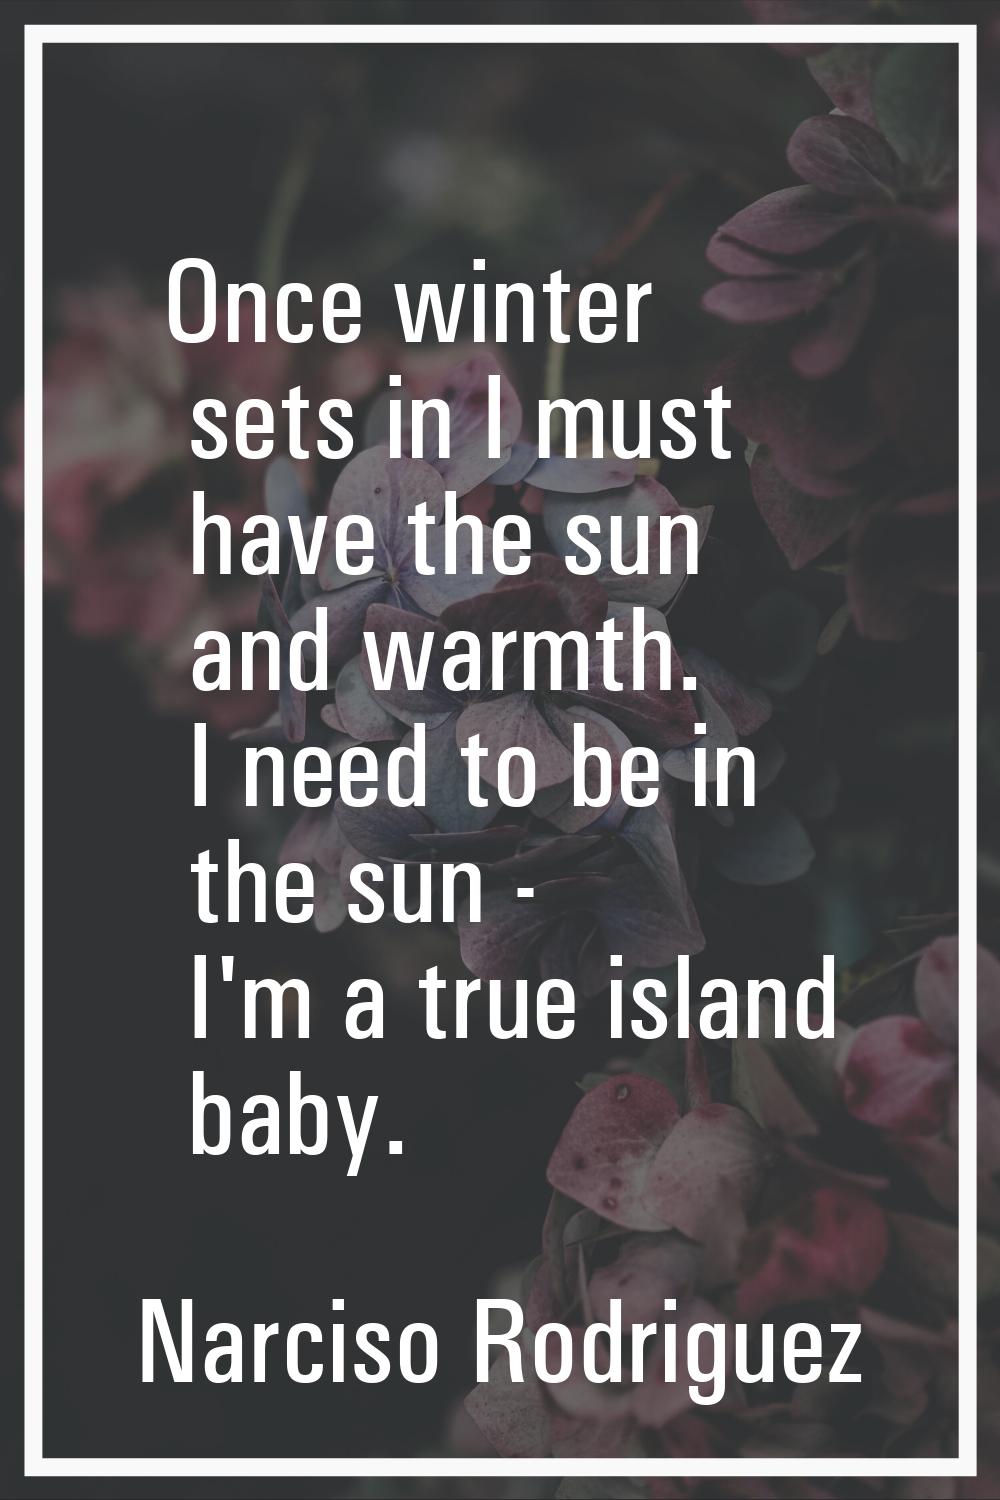 Once winter sets in I must have the sun and warmth. I need to be in the sun - I'm a true island bab